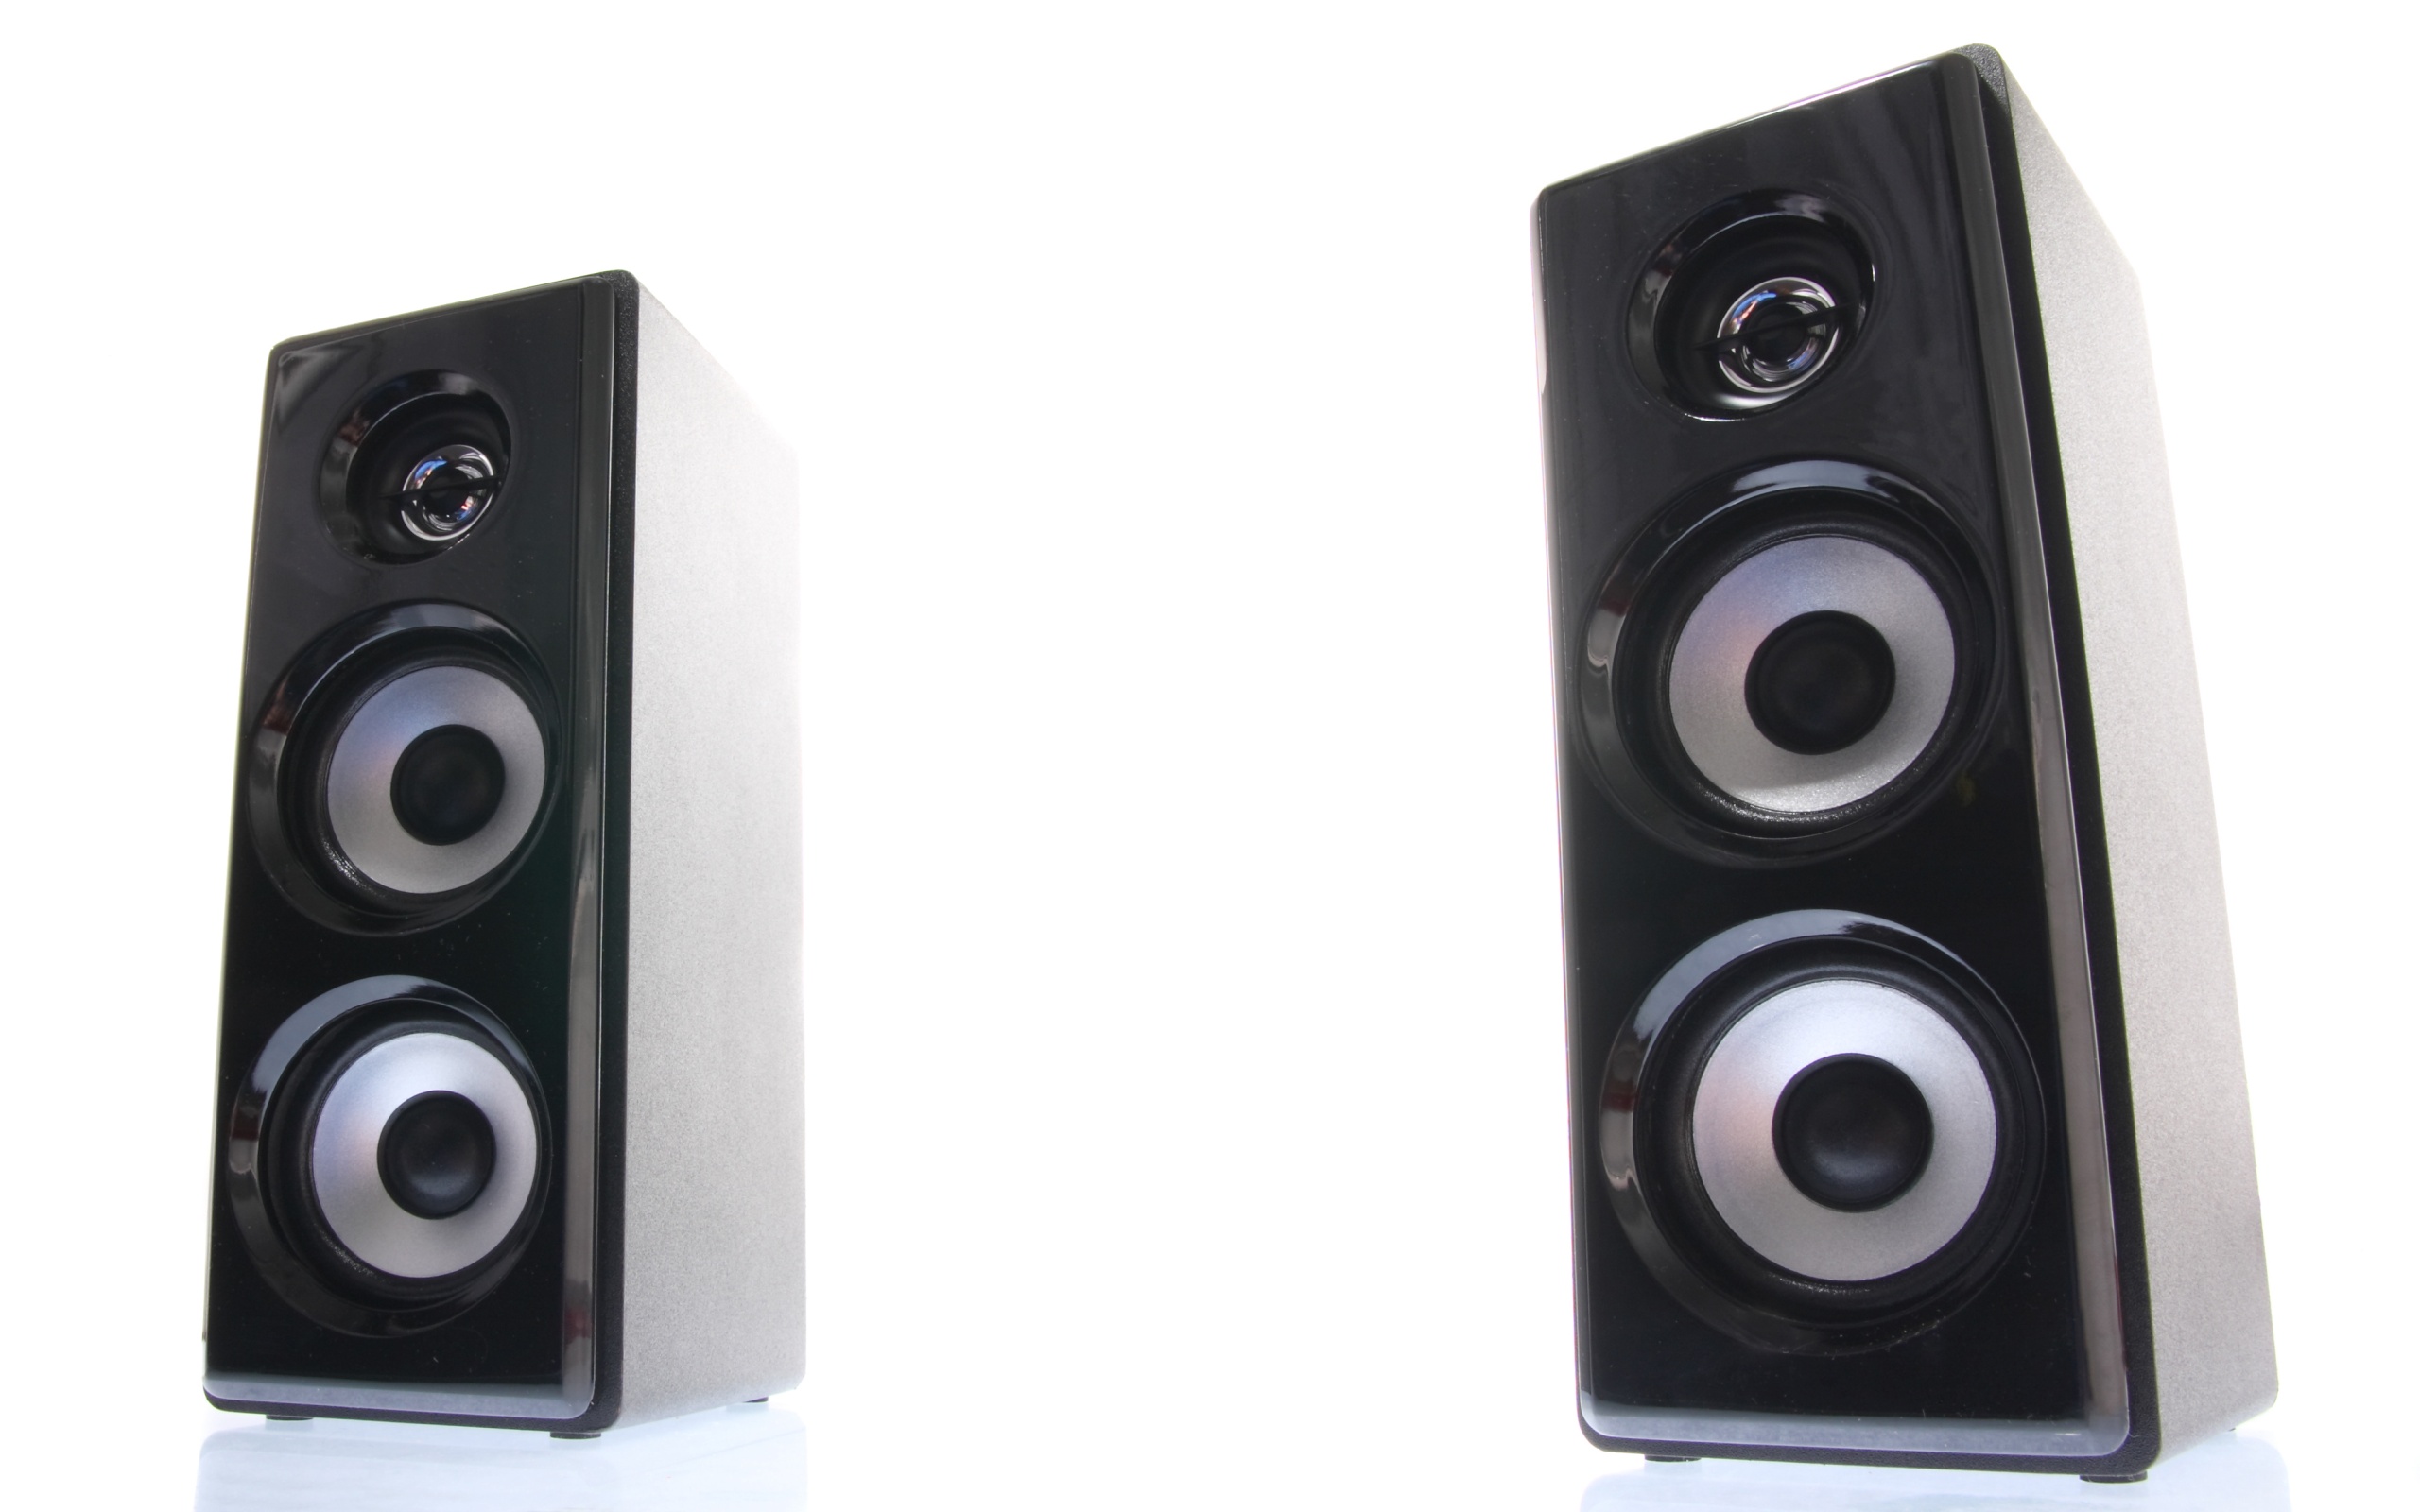 Dj Speakers Stock Photos and Images  123RF